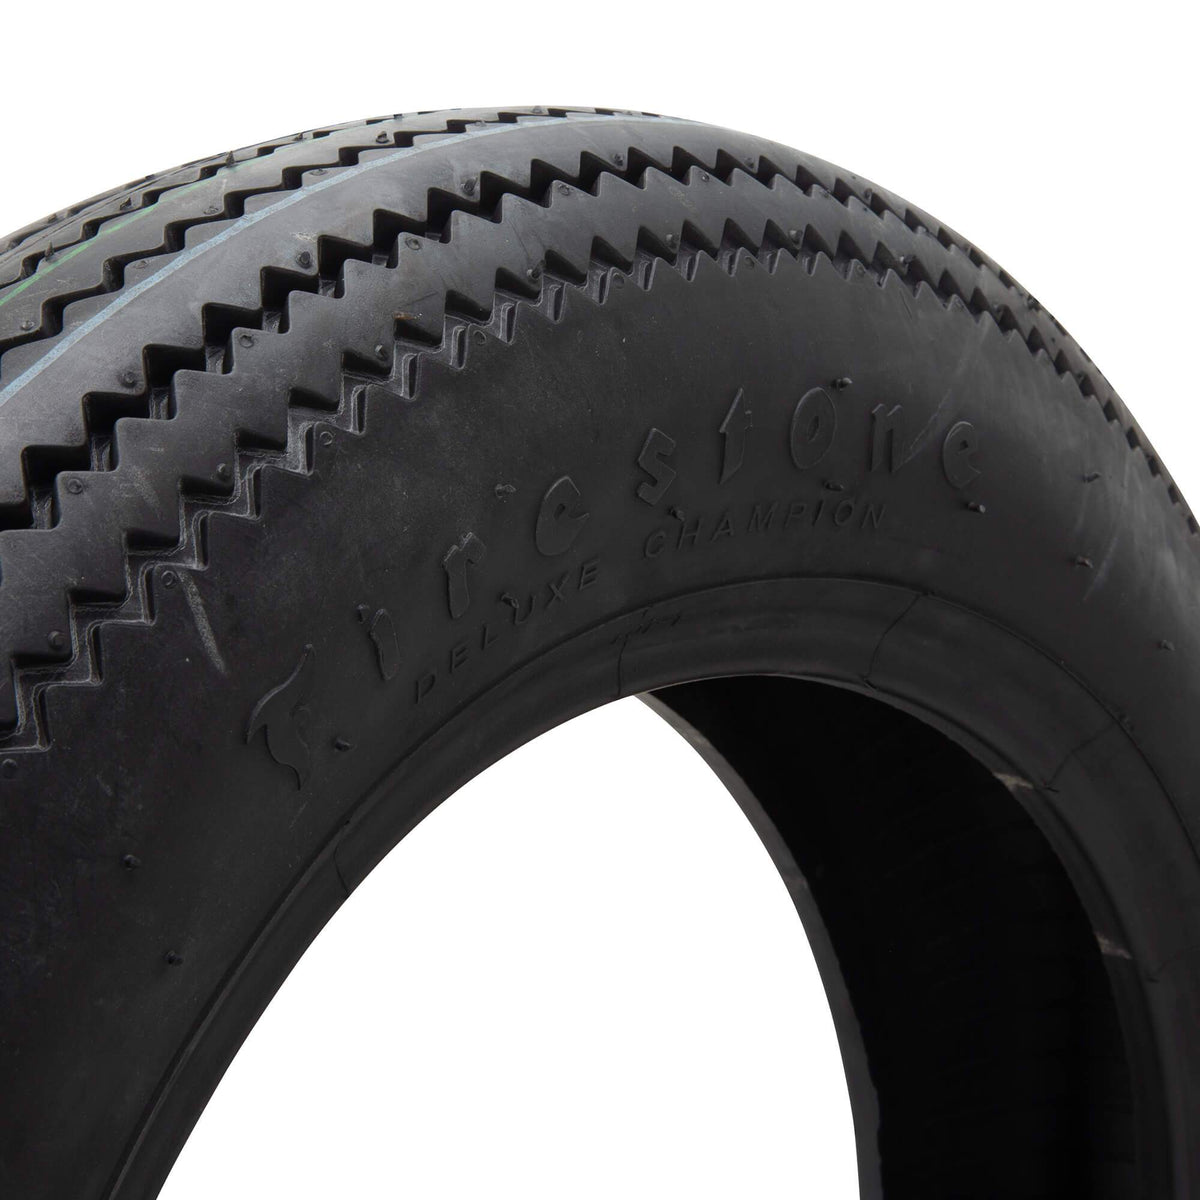 Coker Tire Firestone Deluxe Champion Motorcycle Tire 5.00-16 – Lowbrow